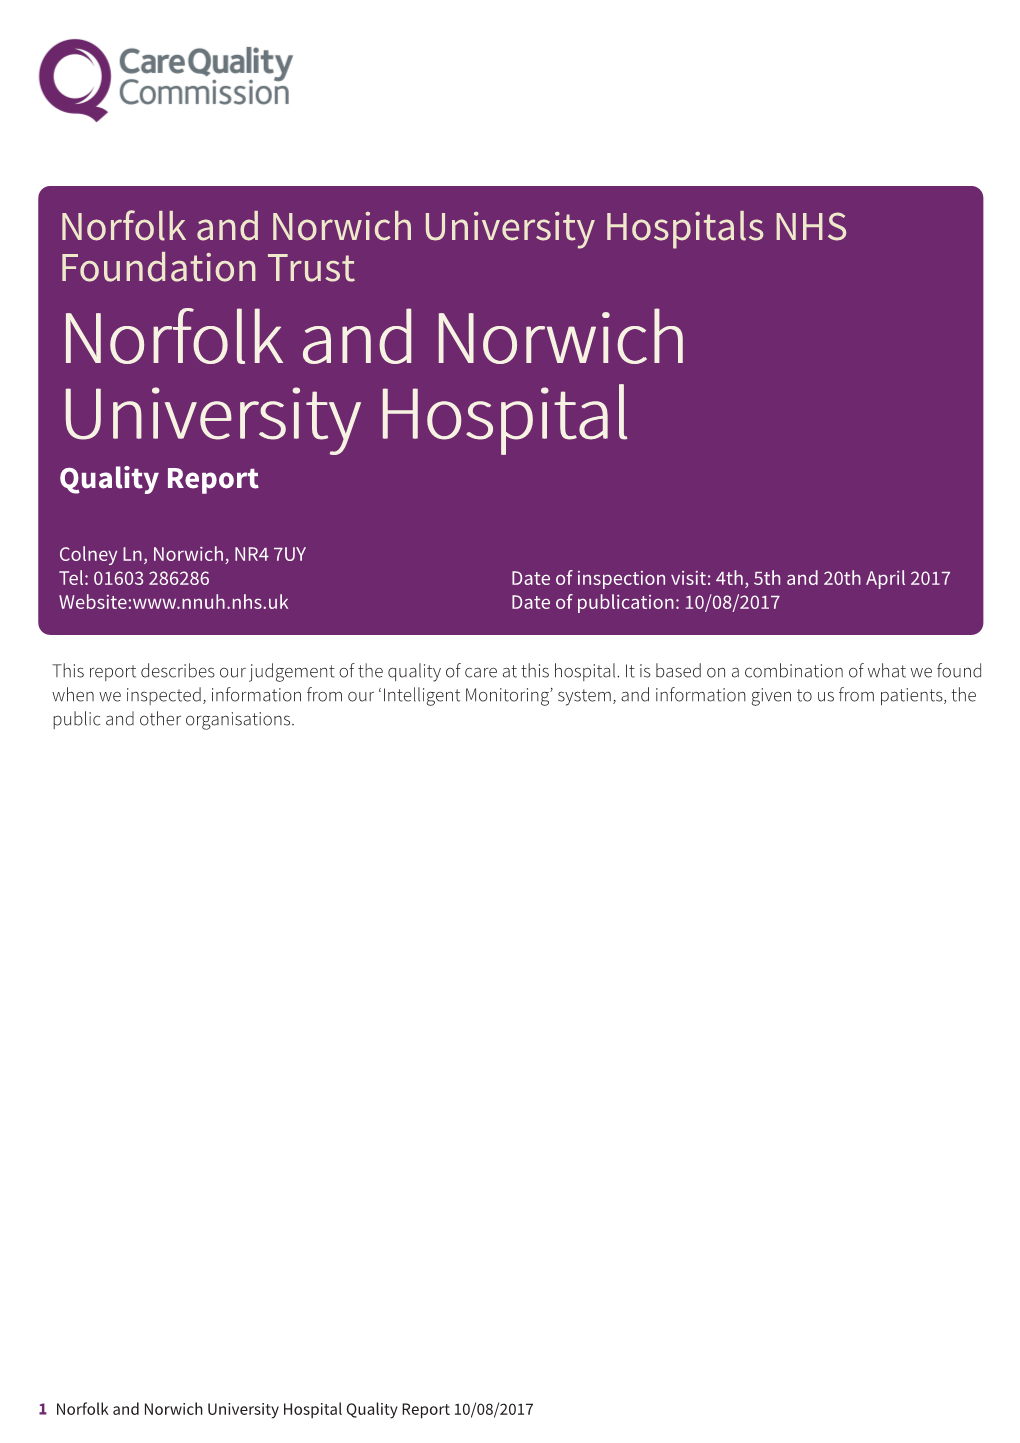 Norfolk and Norwich University Hospitals NHS Foundation Trust Norfolk and Norwich University Hospital Quality Report